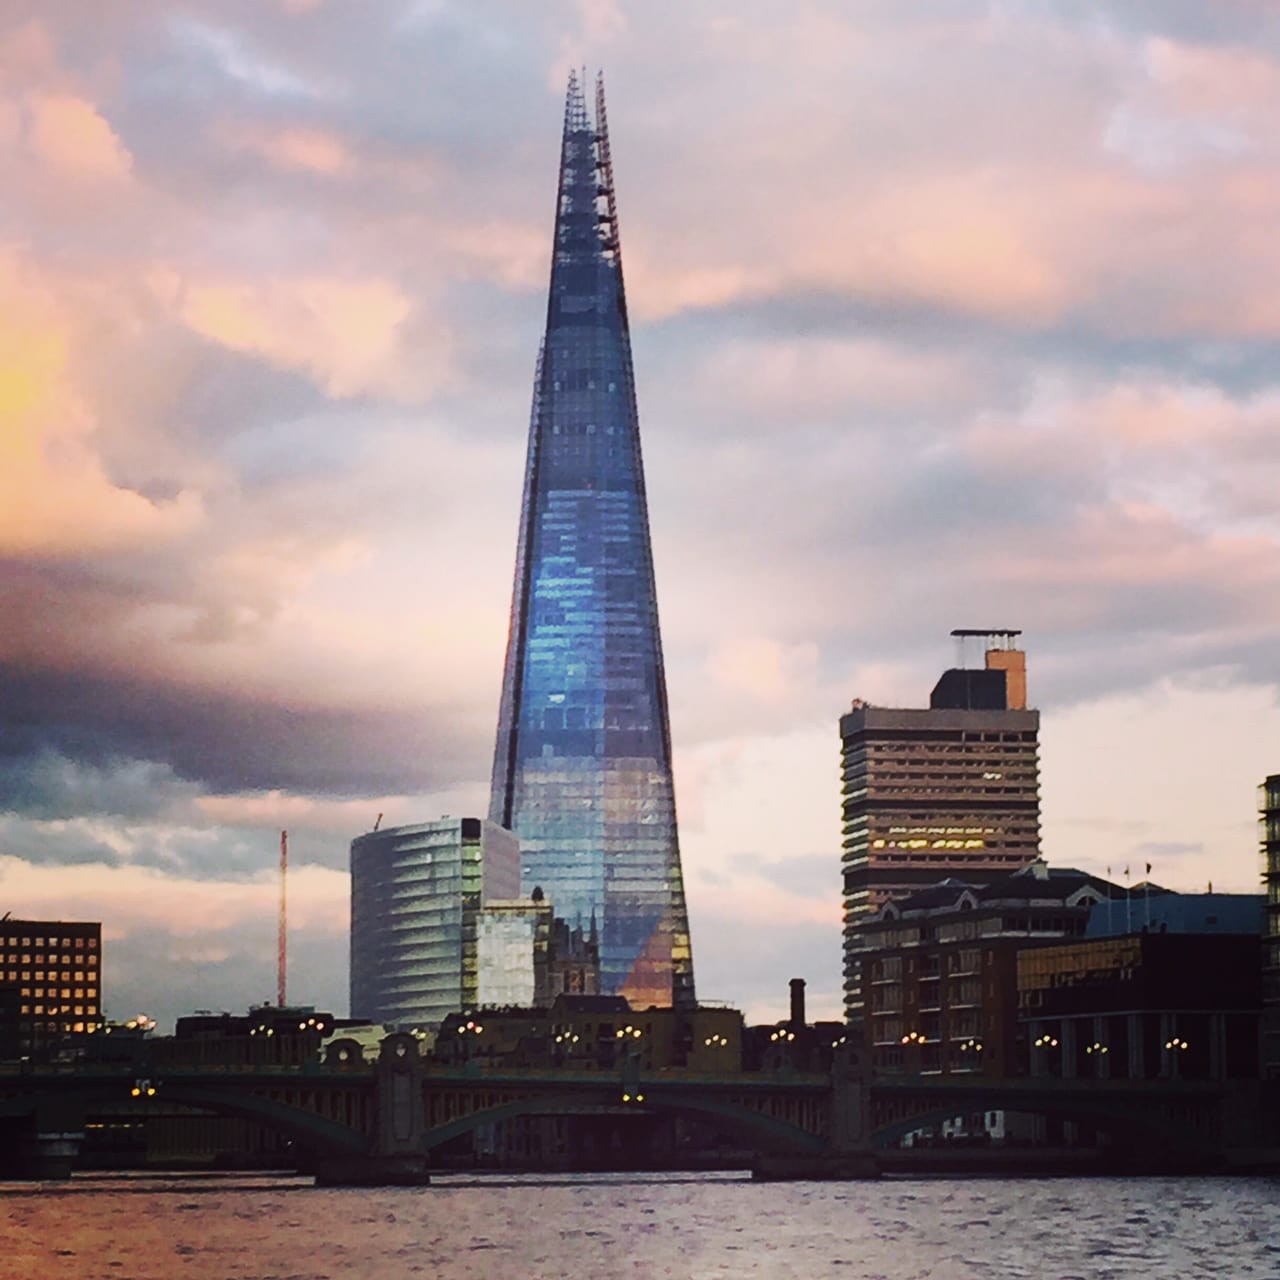 The Shard in London looks beautiful at sunset